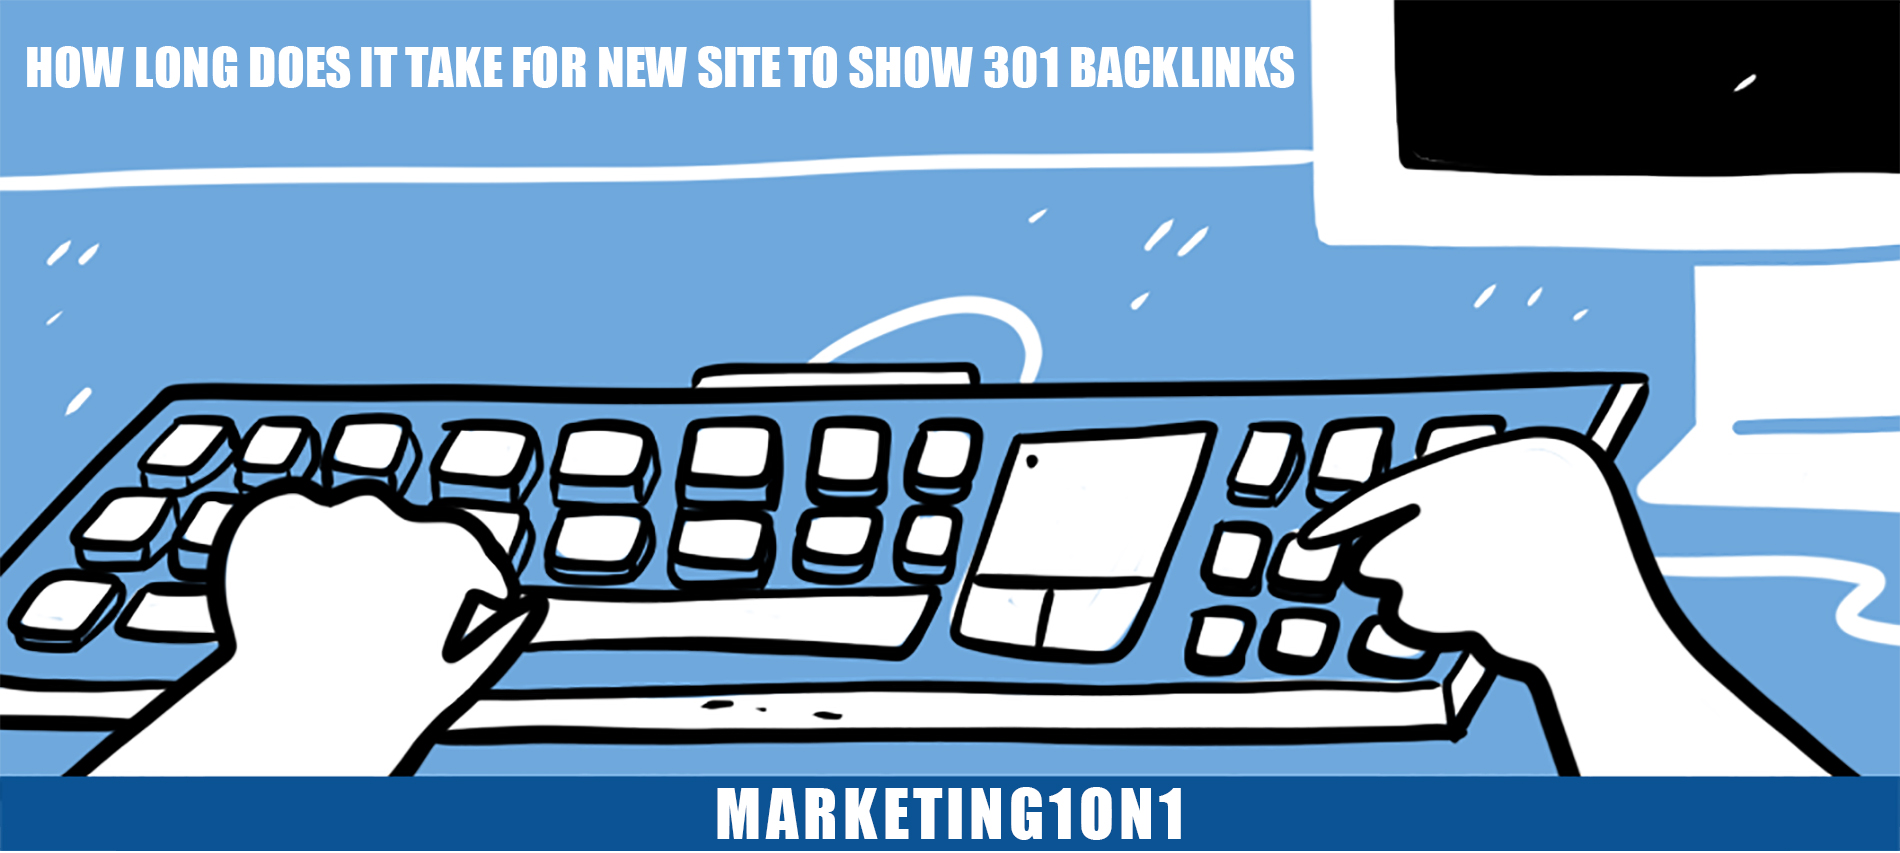 How long does it take for a new site to show 301 backlinks?